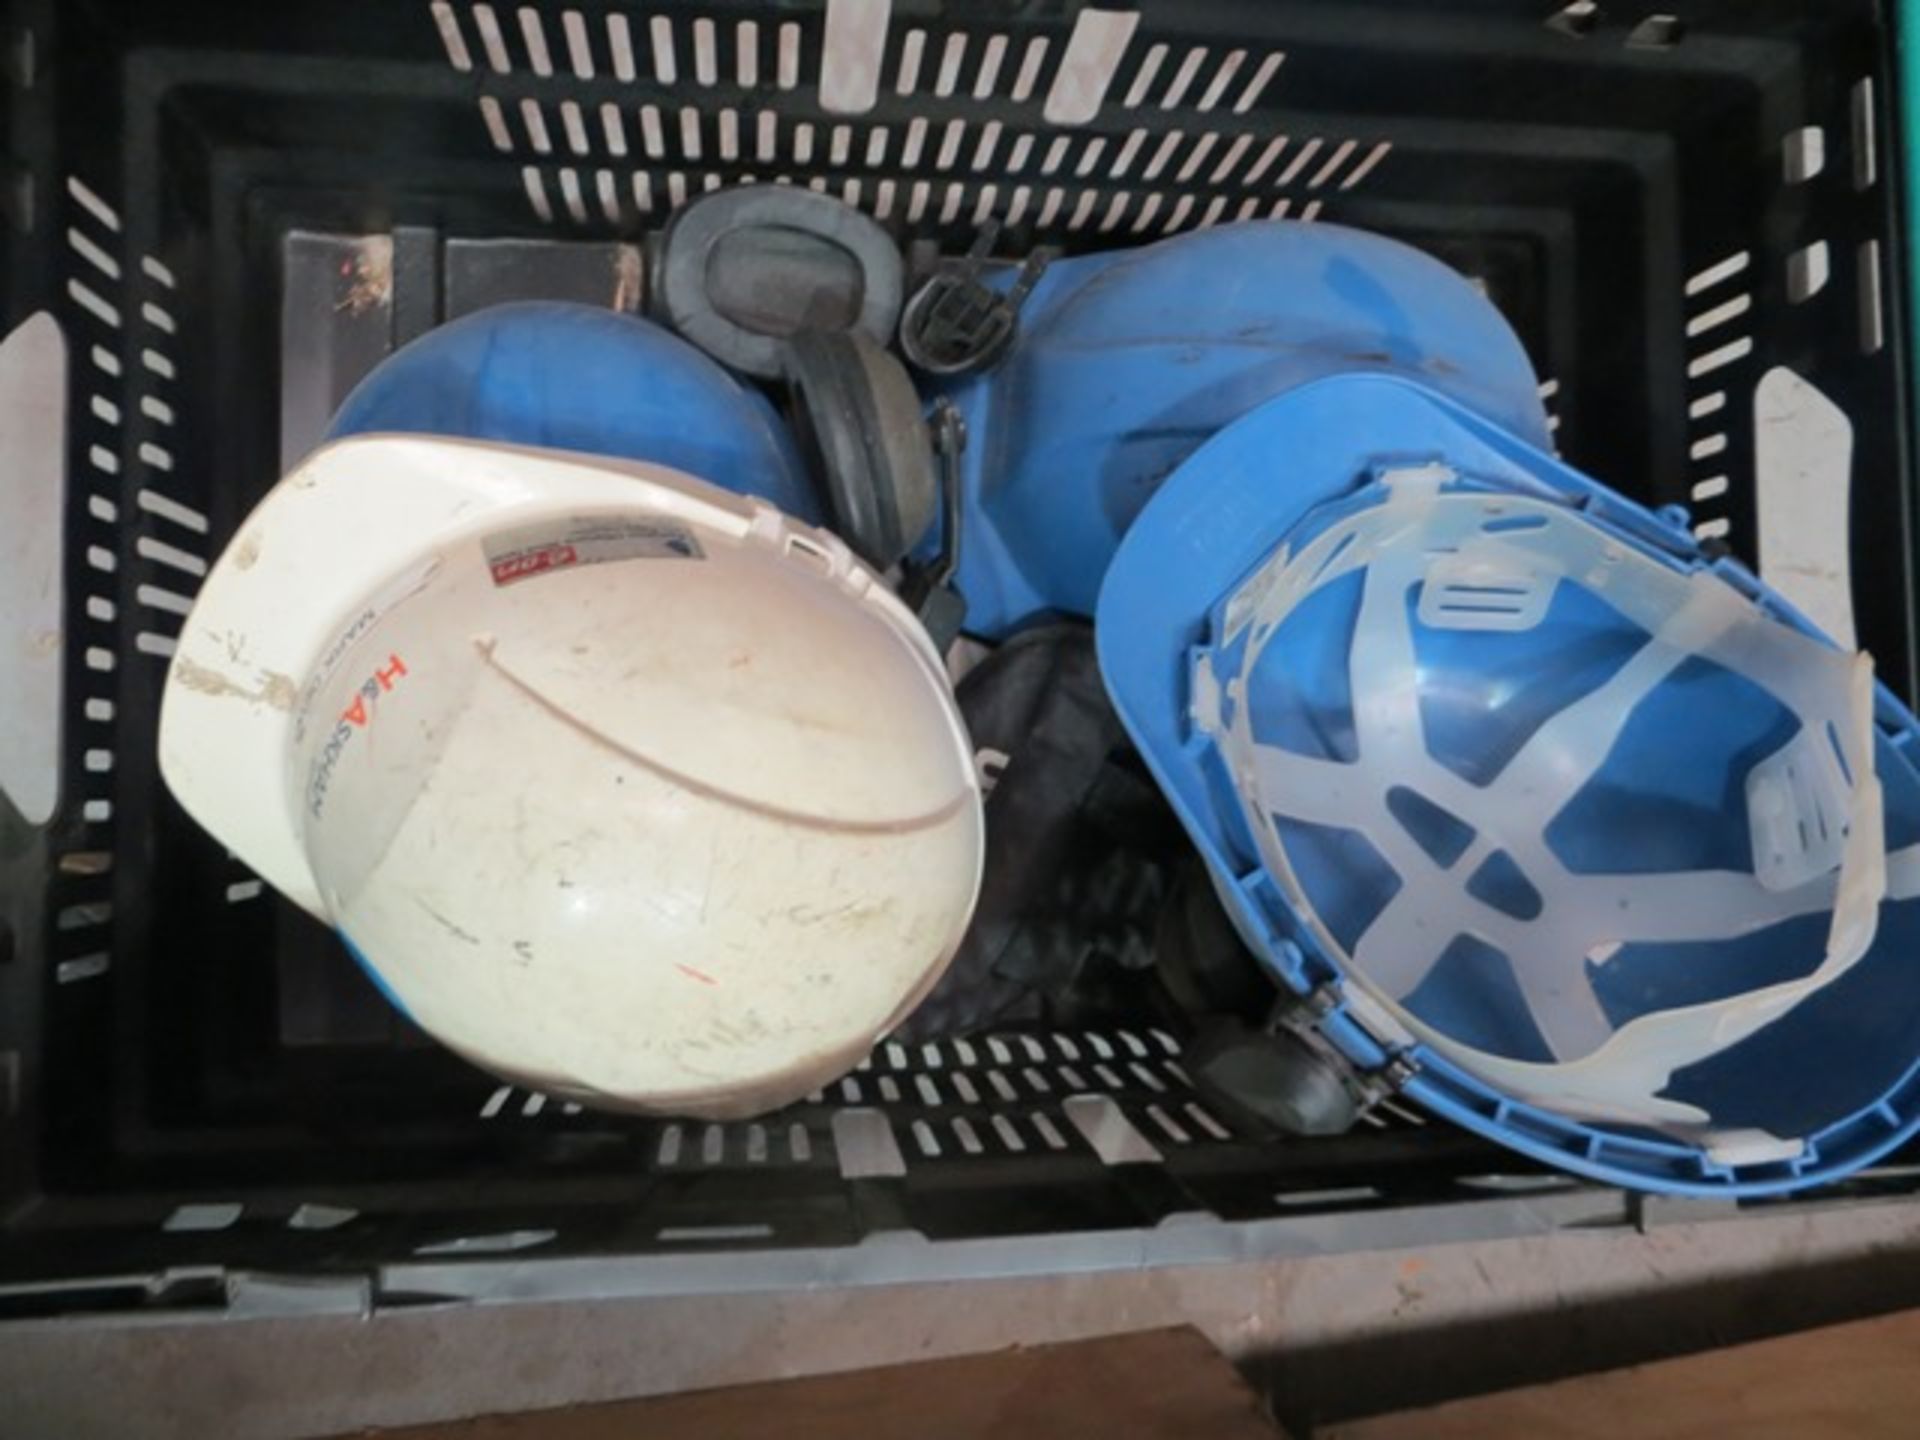 Contents of shelf to include life jackets, Kikusui PCR 200M AC power supply & four hard hats * - Image 2 of 3